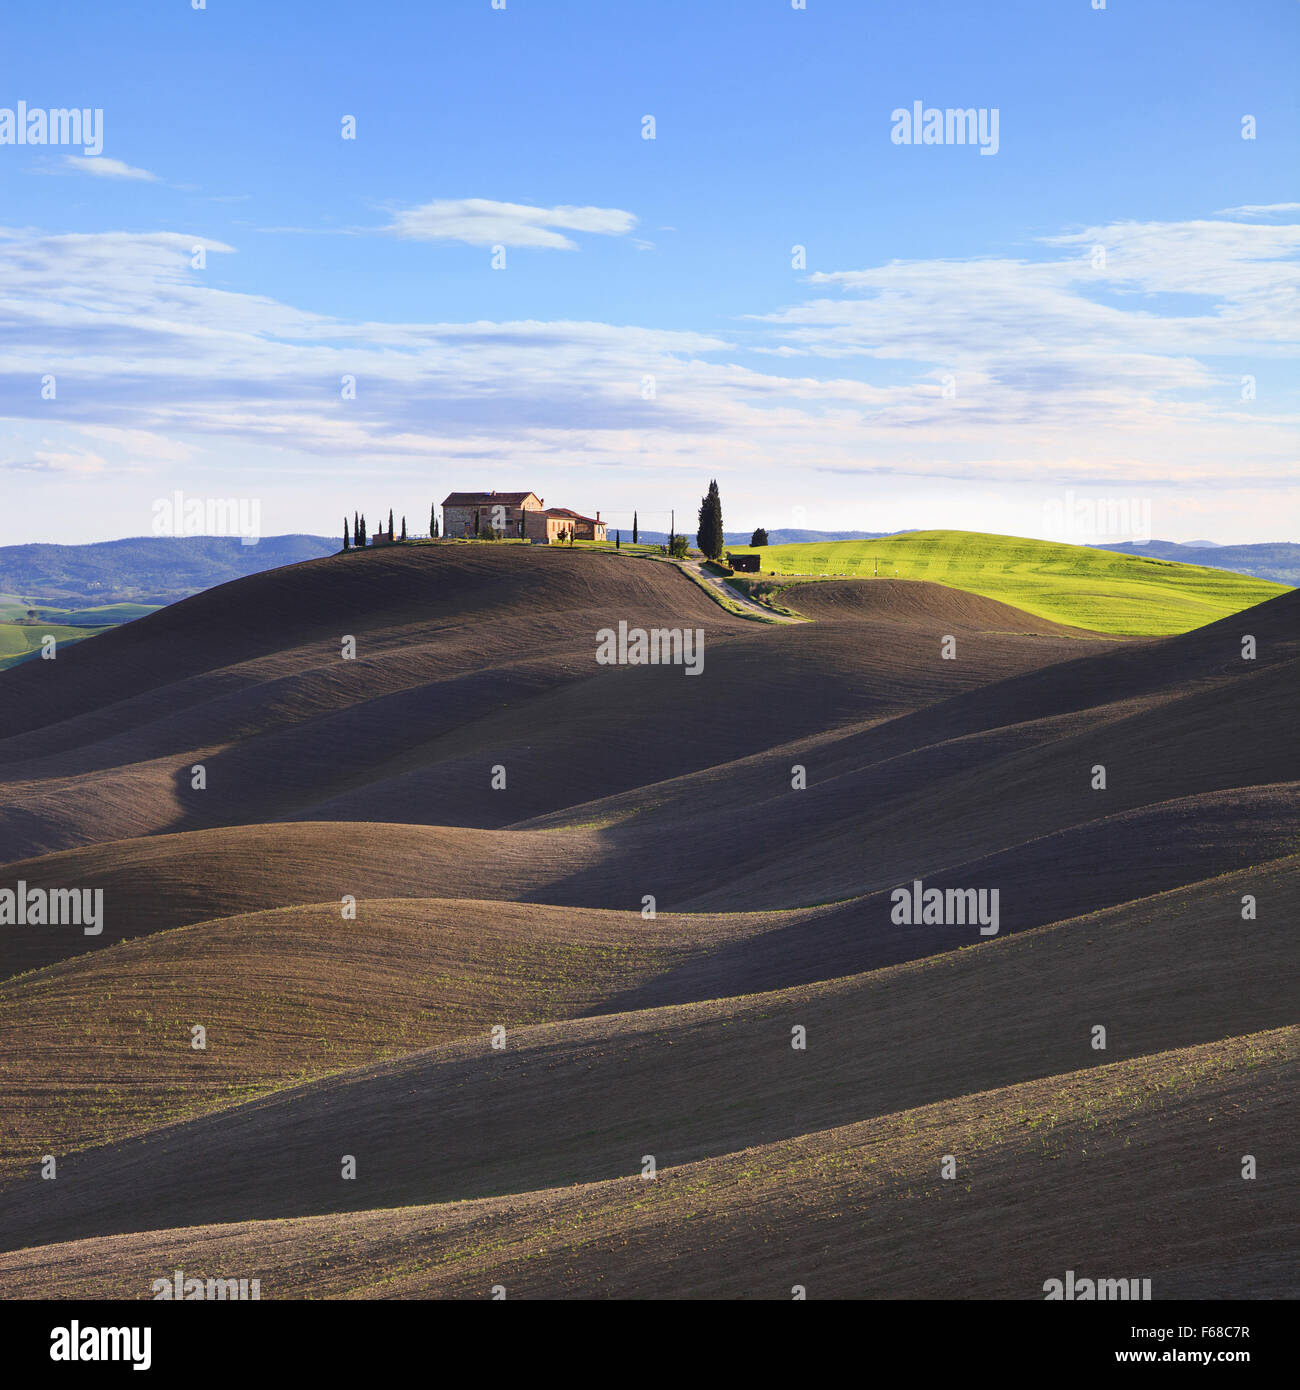 Tuscany, rural landscape in Crete Senesi land. Plowed rolling hills, countryside farm, cypresses trees, green field and blue sky Stock Photo